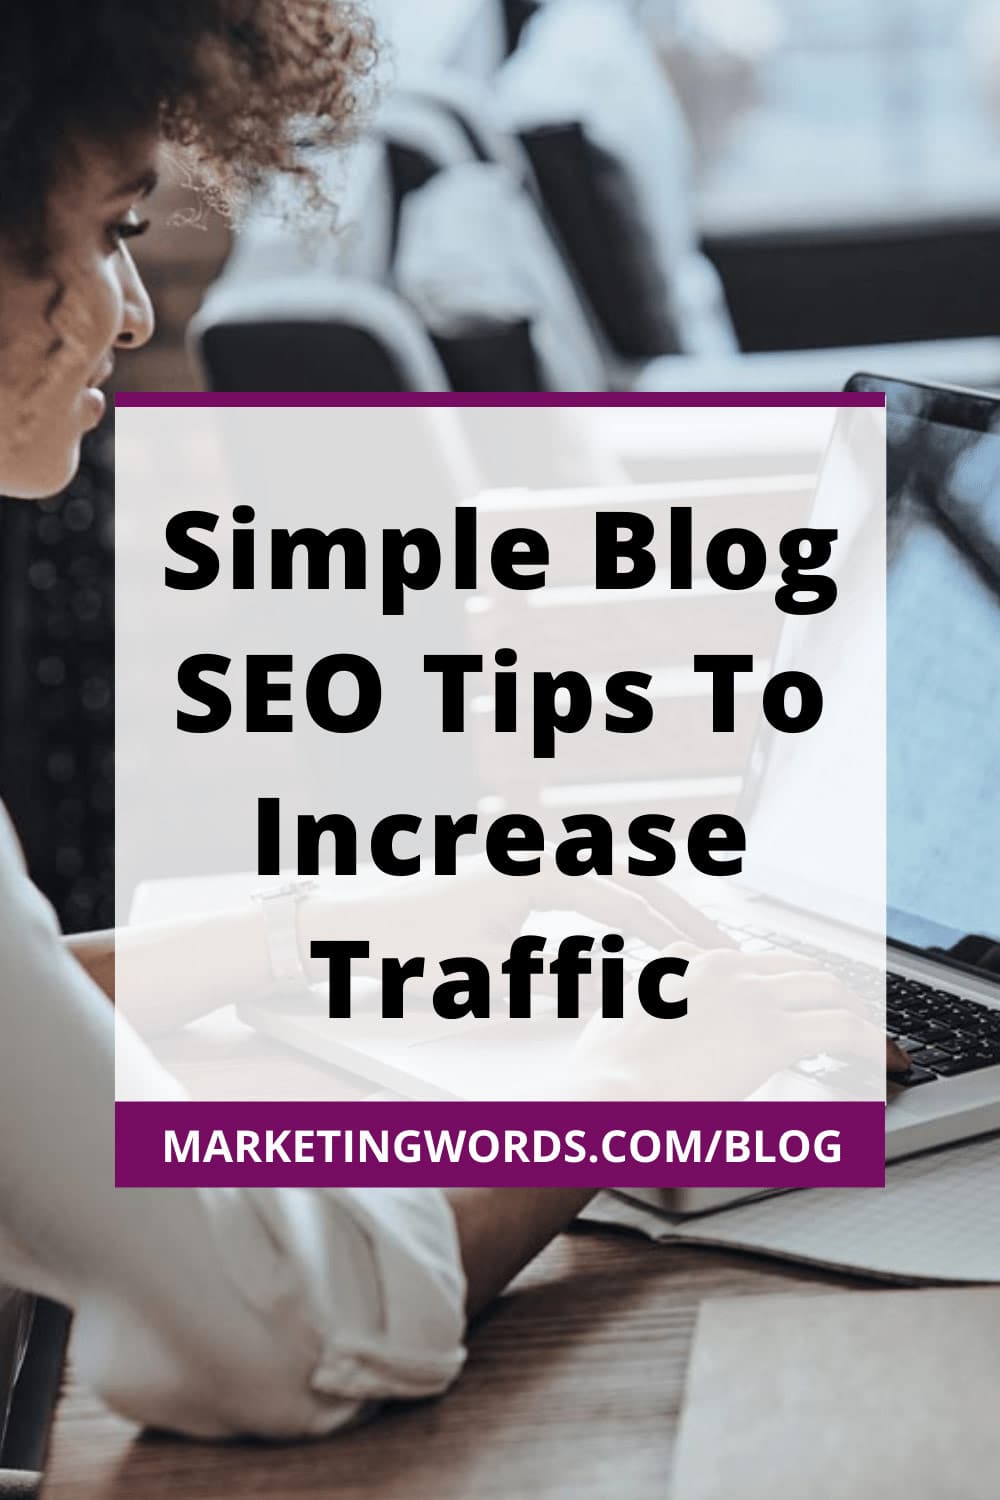 Simple Blog SEO Tips To Increase Traffic